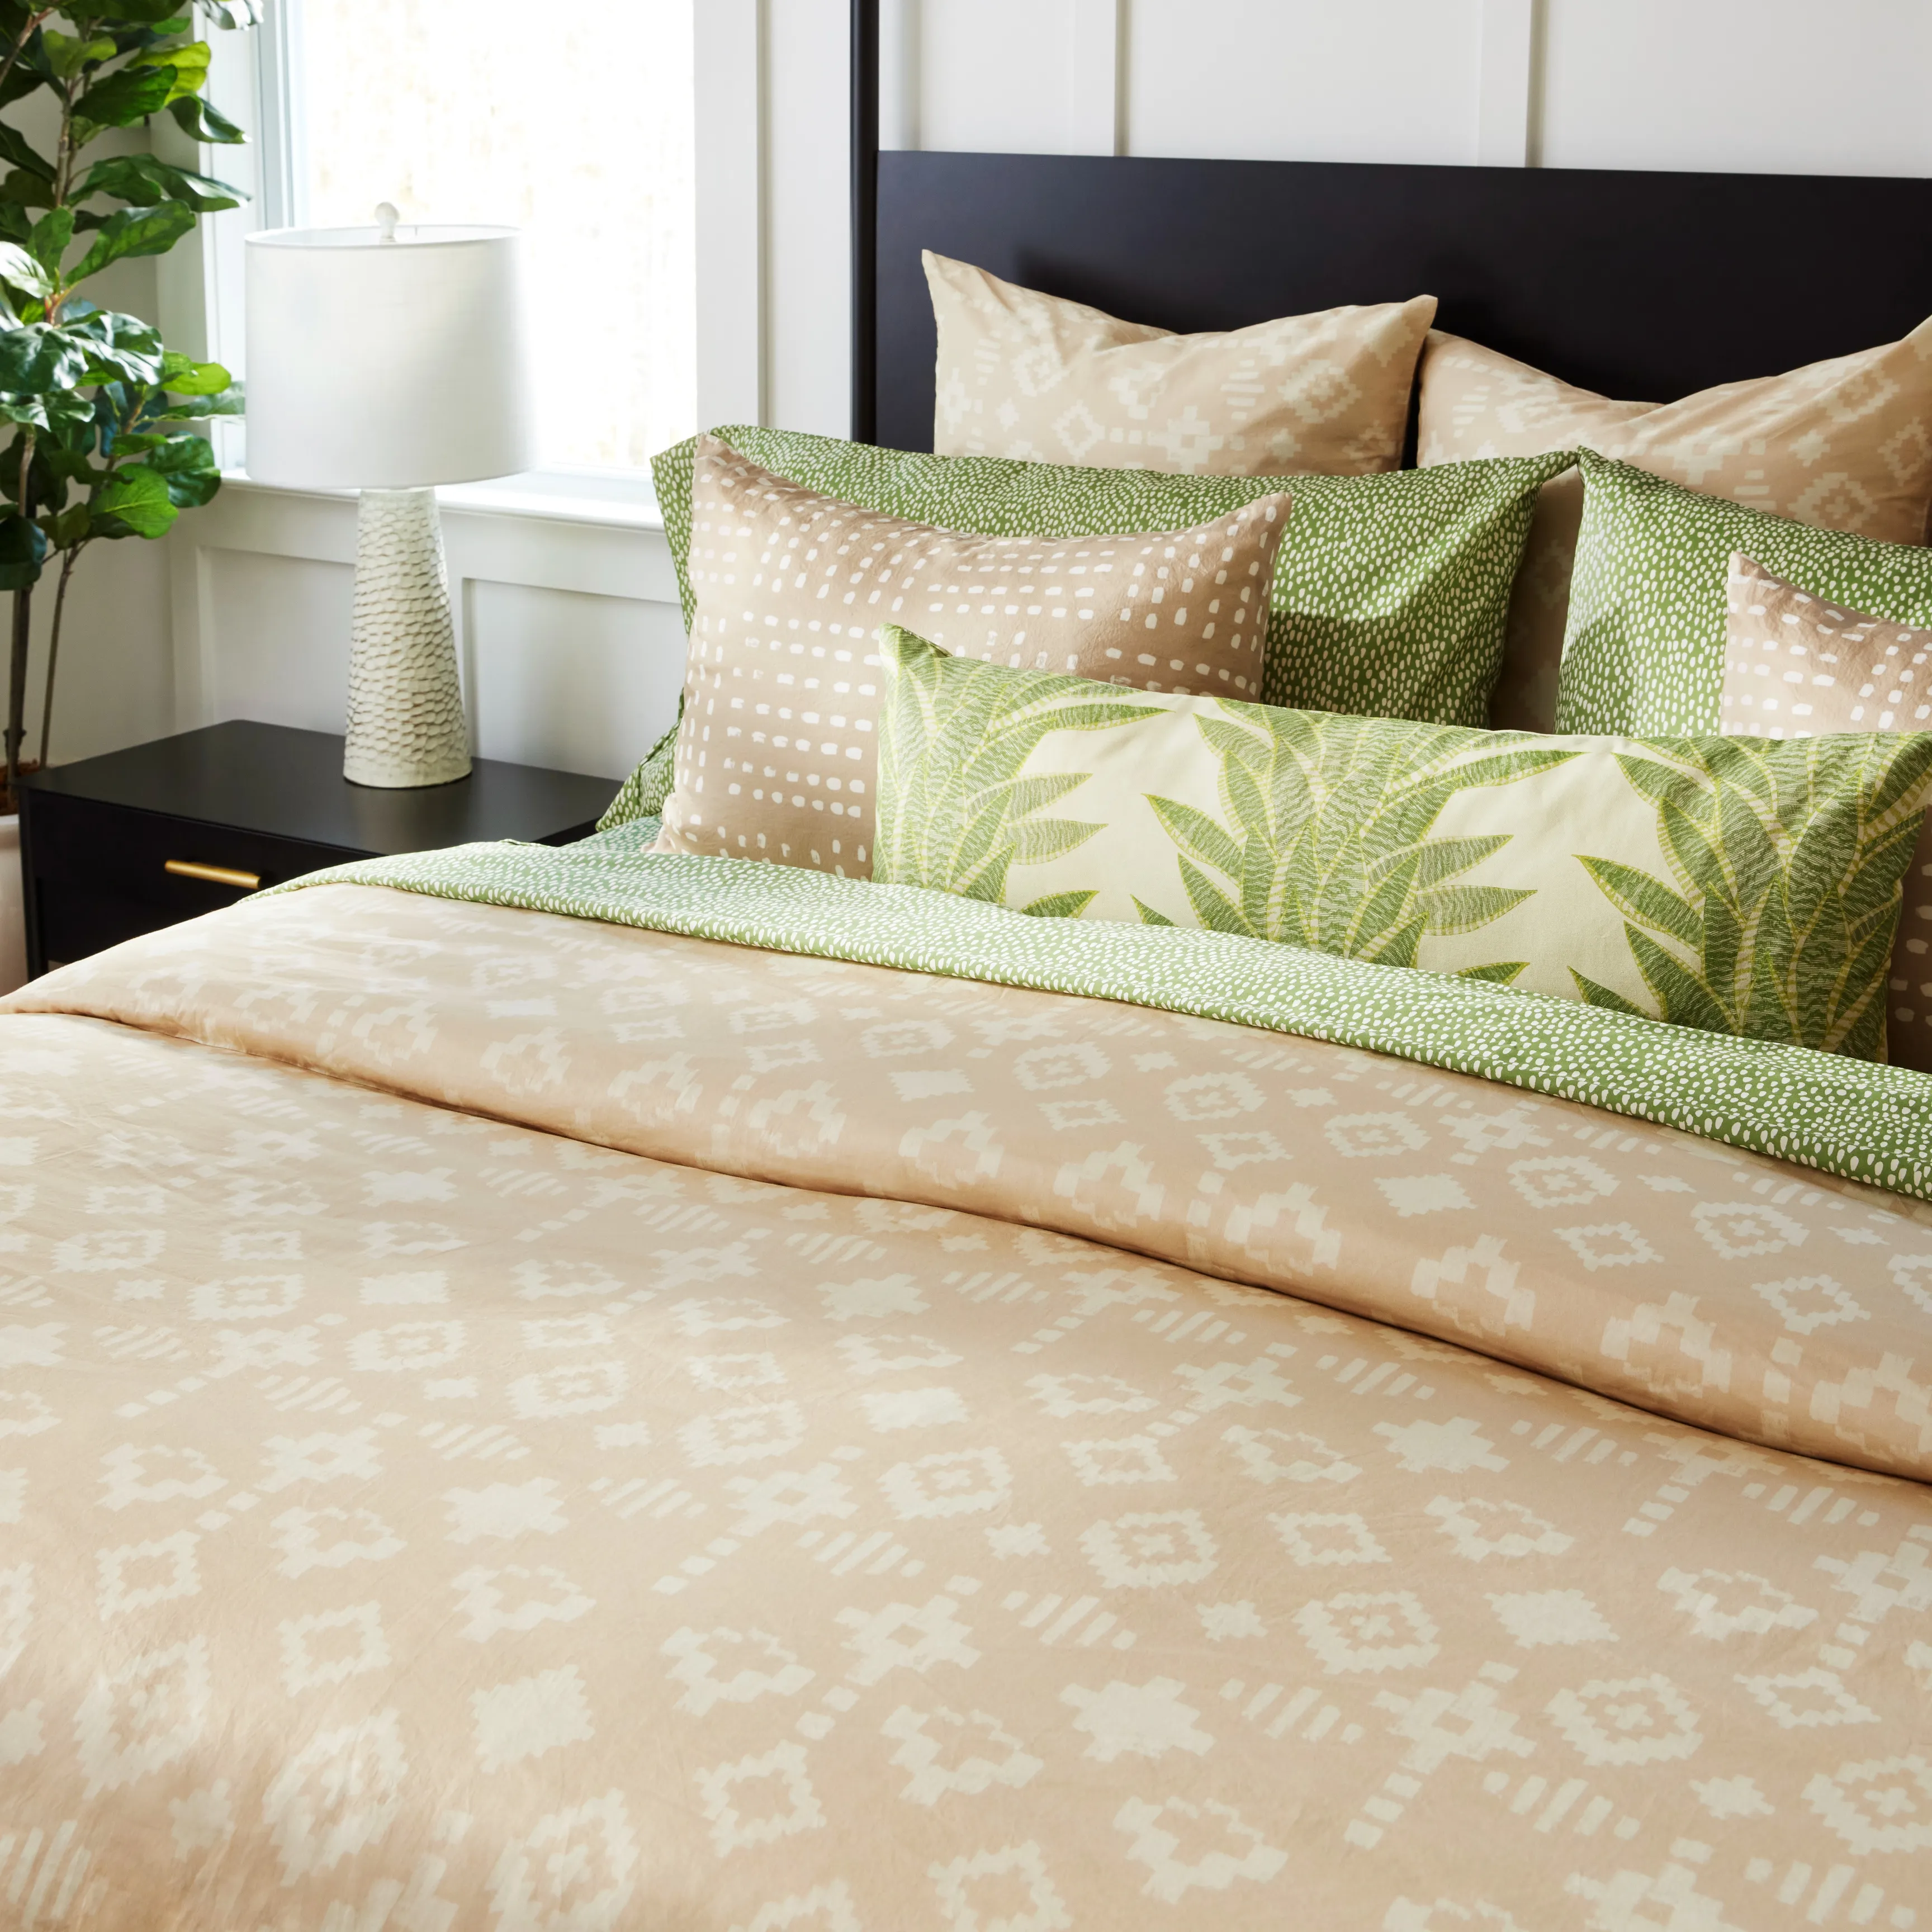 Tropical Neutral Featured Bedding Collection